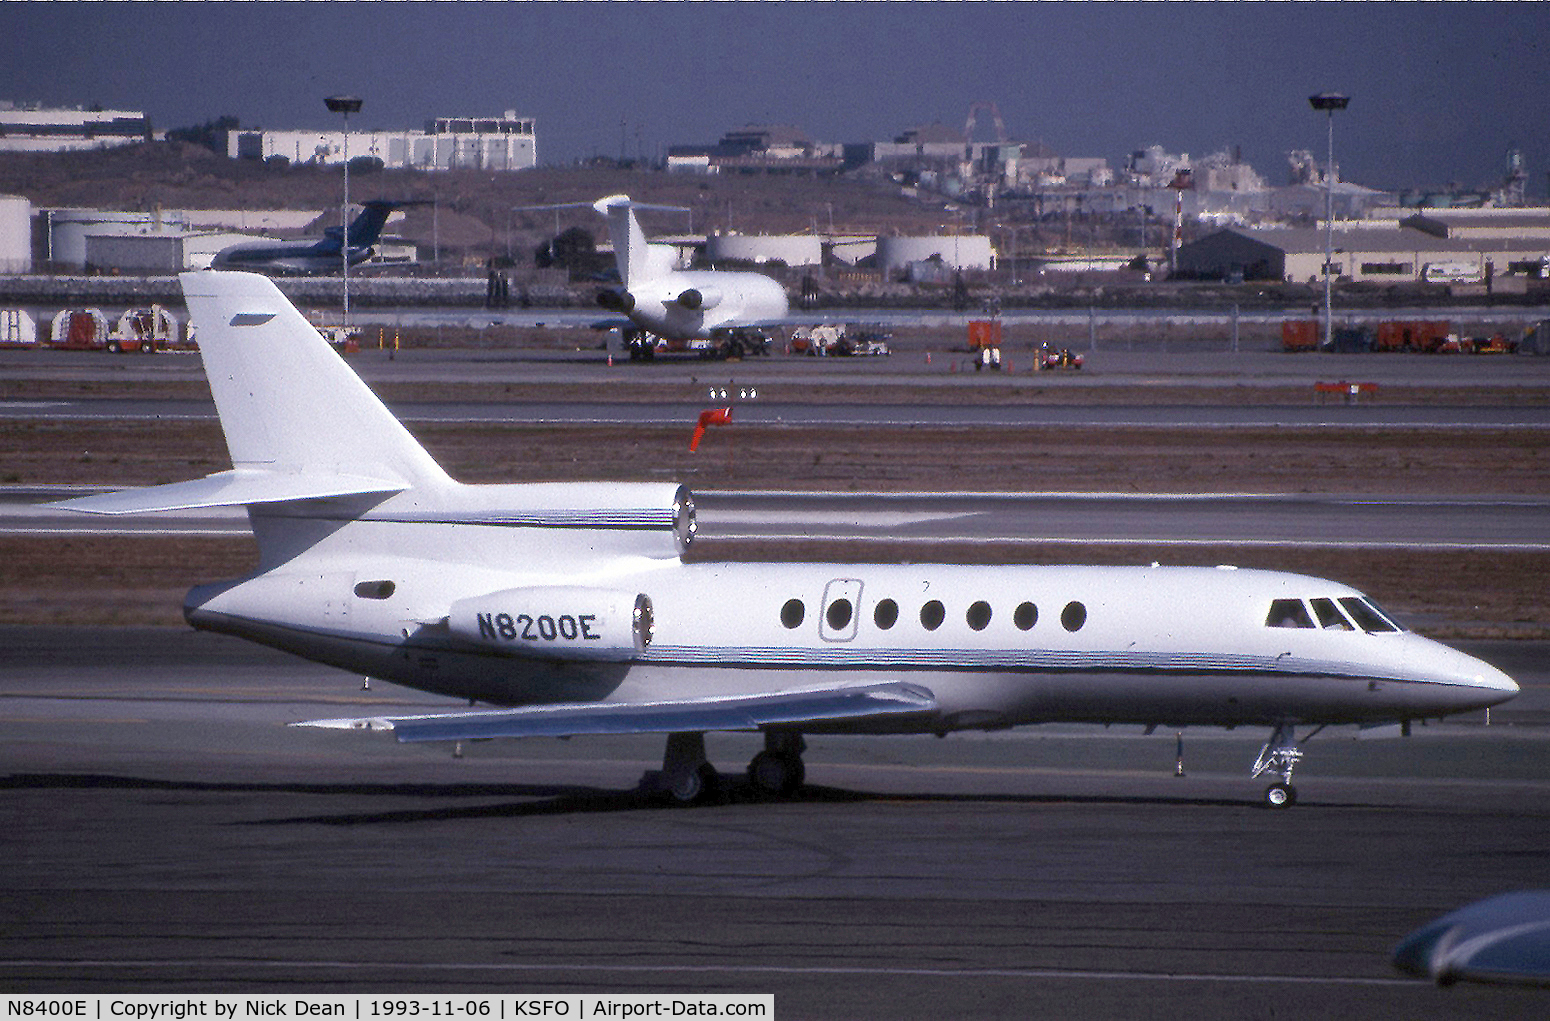 N8400E, 1984 Dassault Falcon 50 C/N 150, Seen here as N8200E this airframe is currently registered N8400E as posted still with Emerson Electric